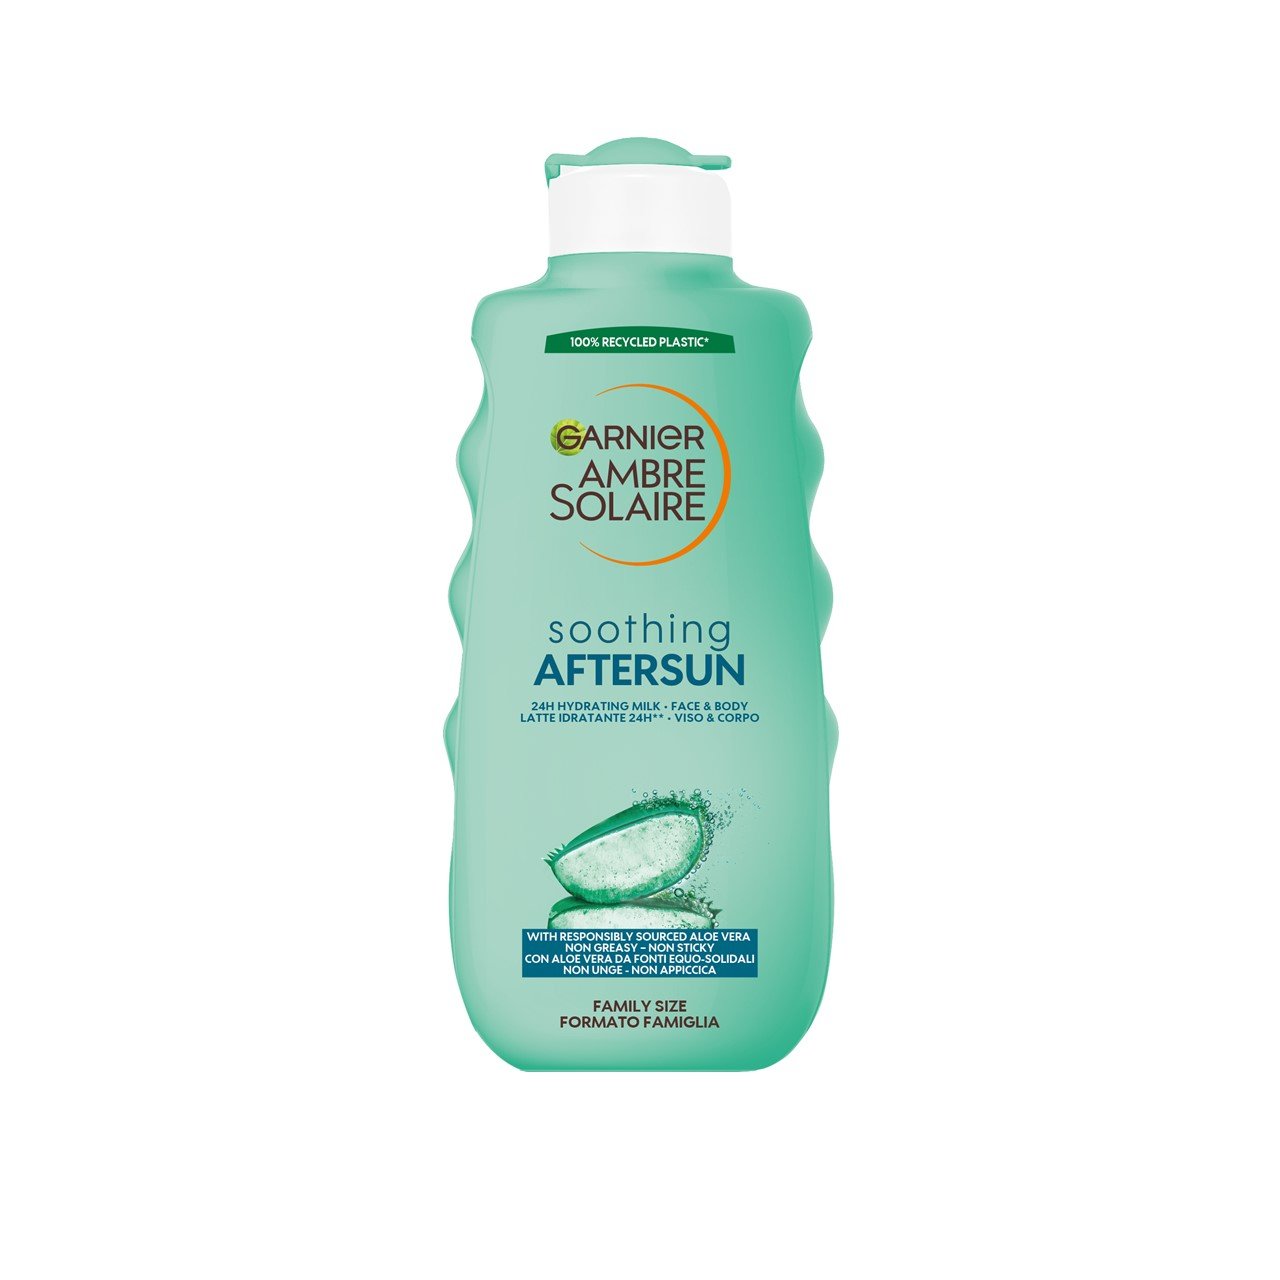 Garnier Ambre Solaire Soothing Aftersun 24h Hydrating Milk 400ml (13.53fl oz)